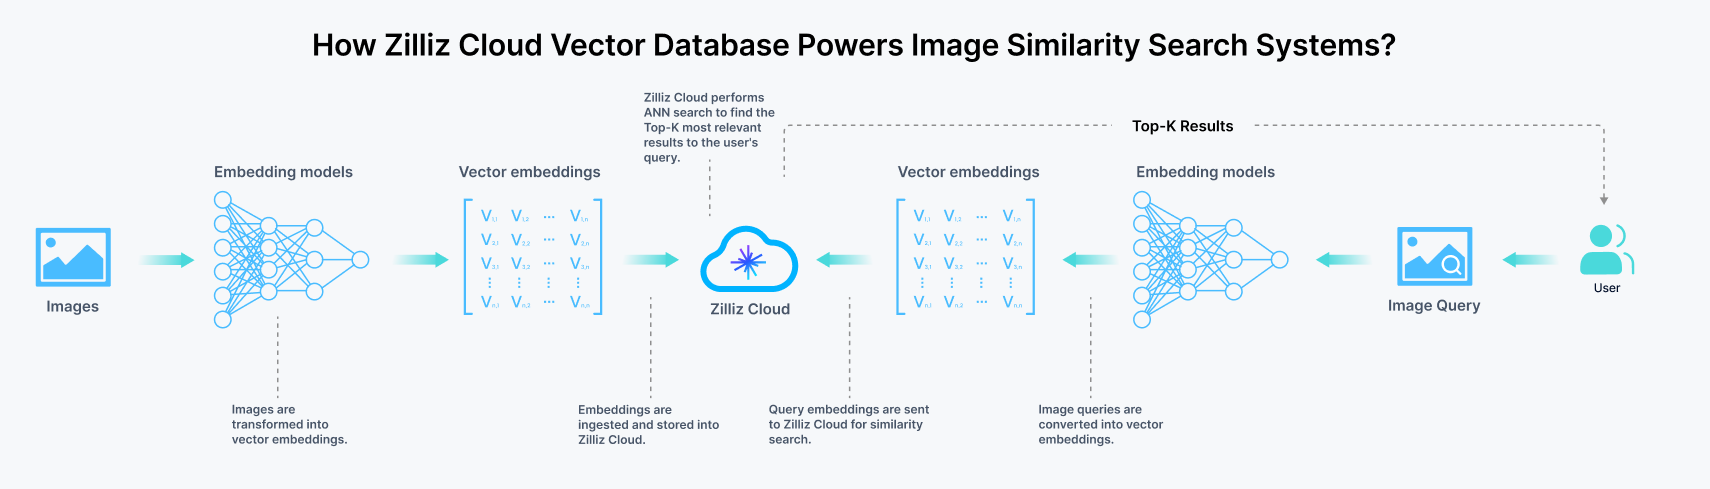 How Zilliz Cloud Powers An Image Similarity Search System